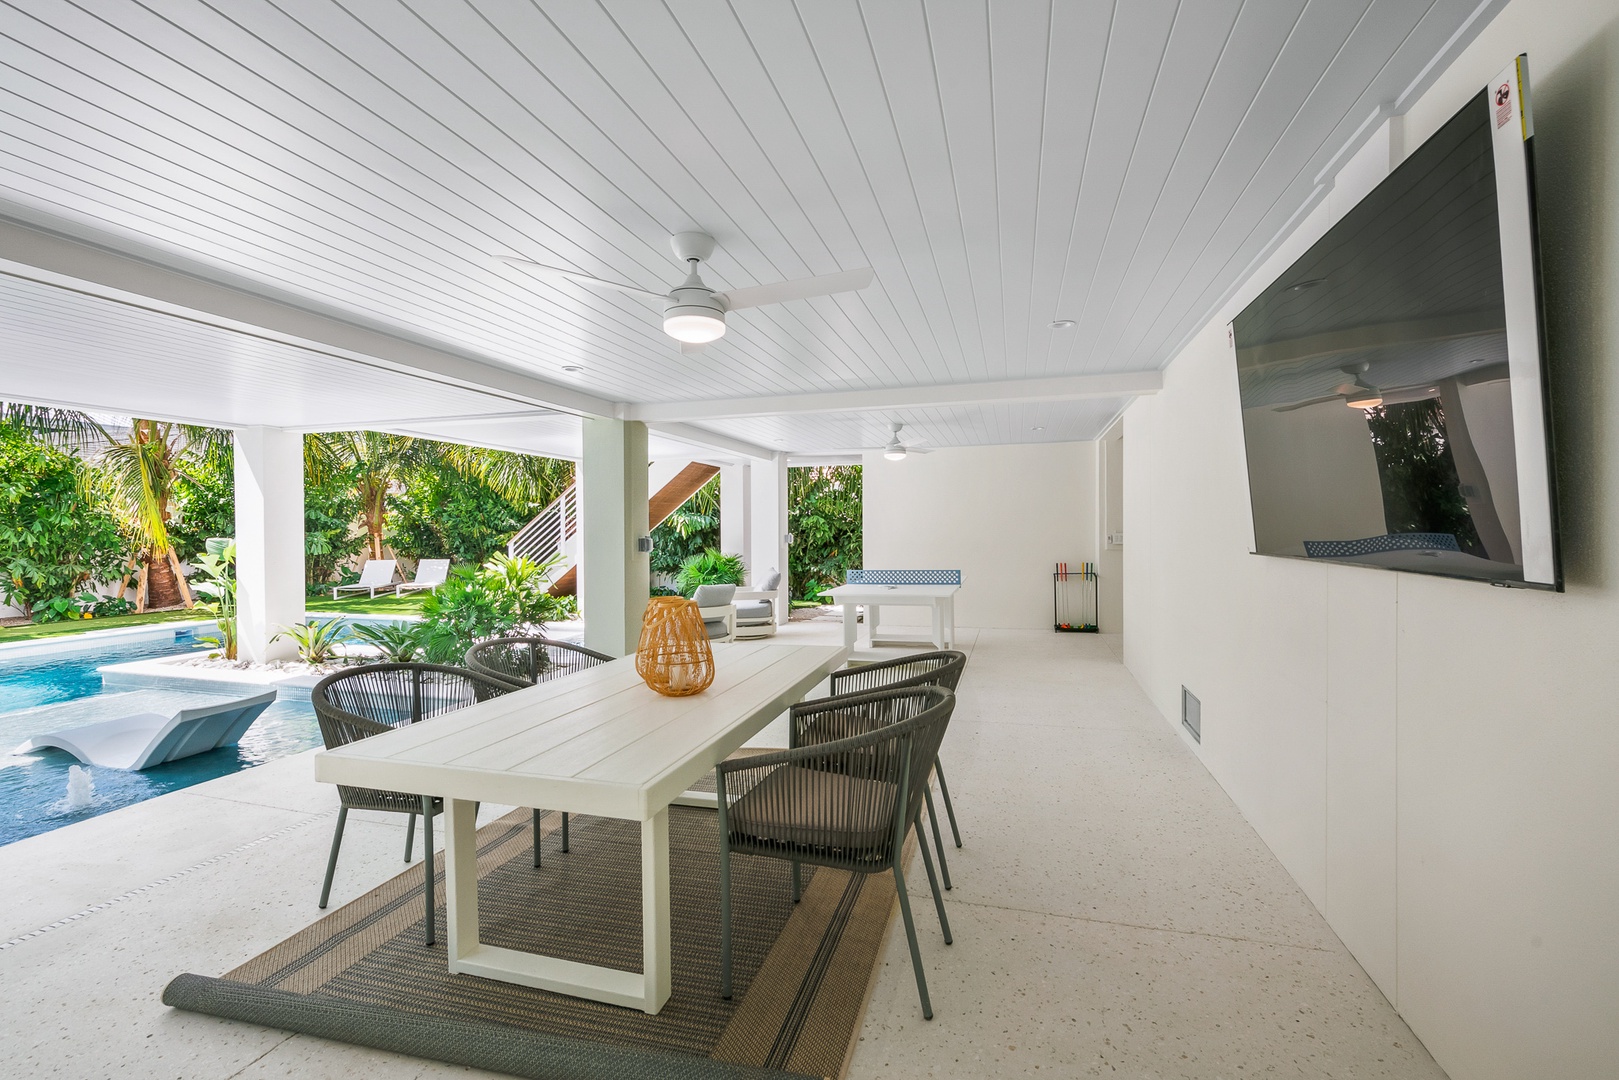 Outdoor Dining - Covered Lanai